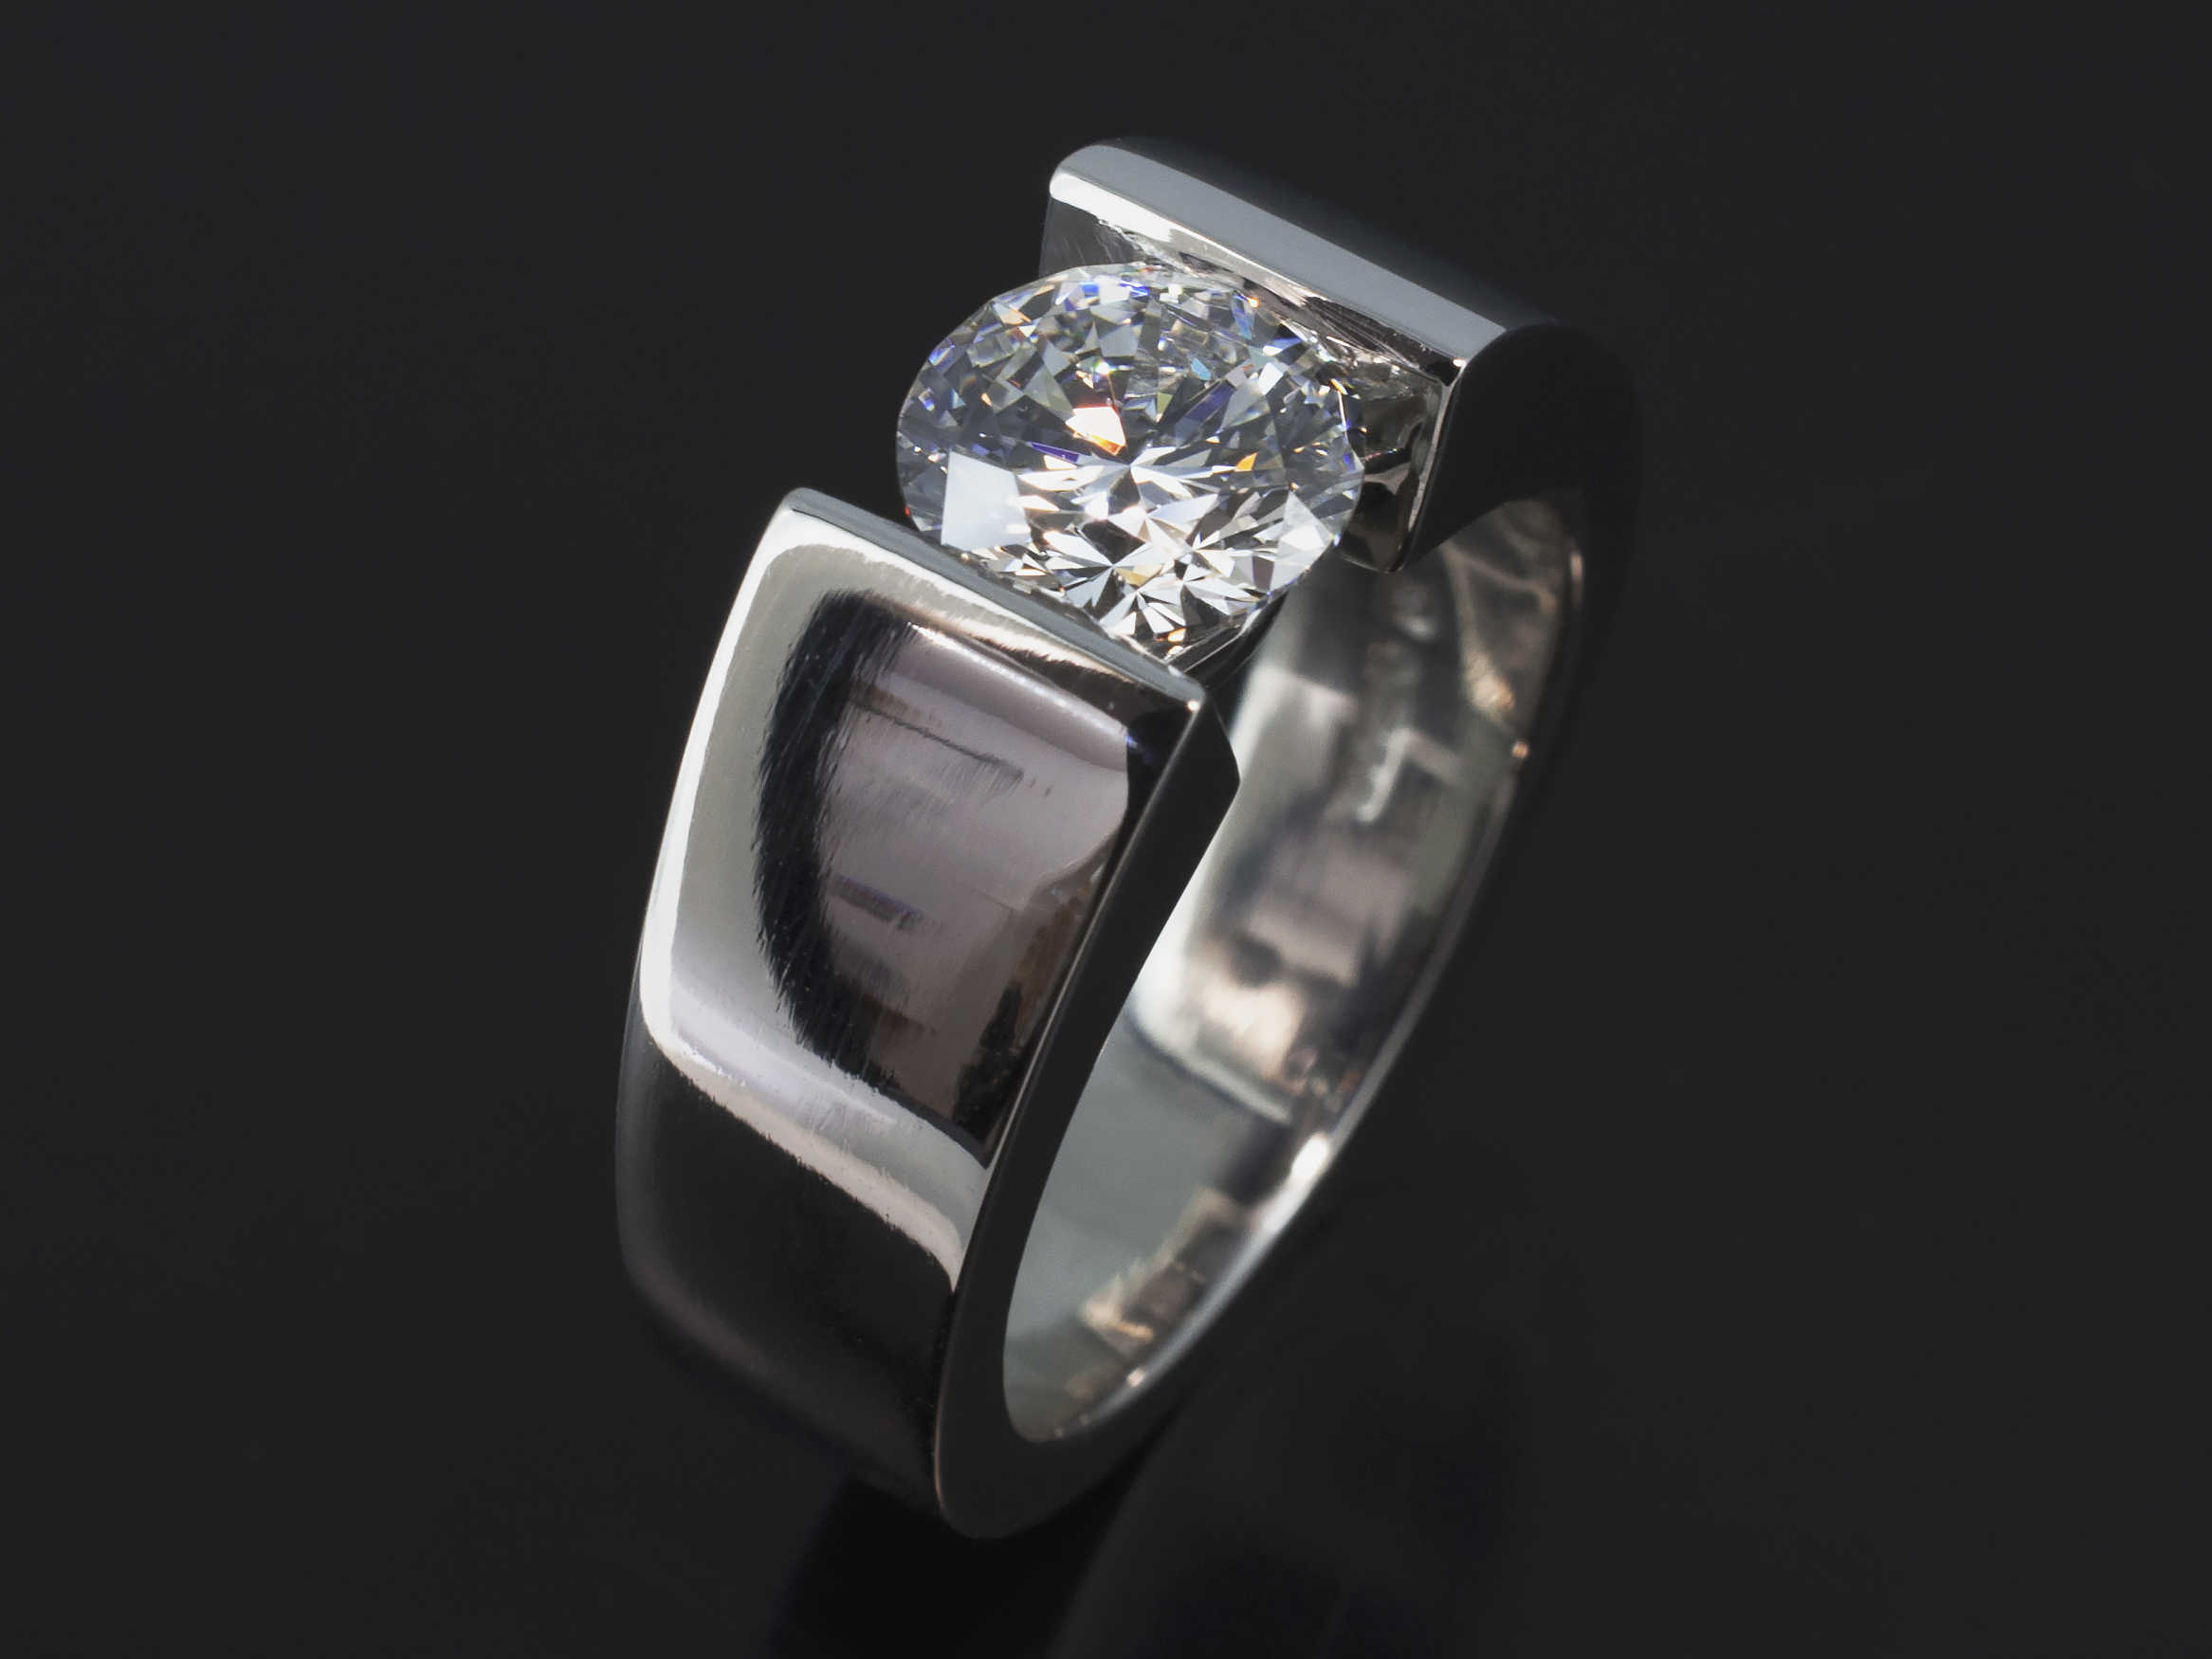 Asymmetrical Tension Set Engagement Ring Semi Mount | Wexford Jewelers